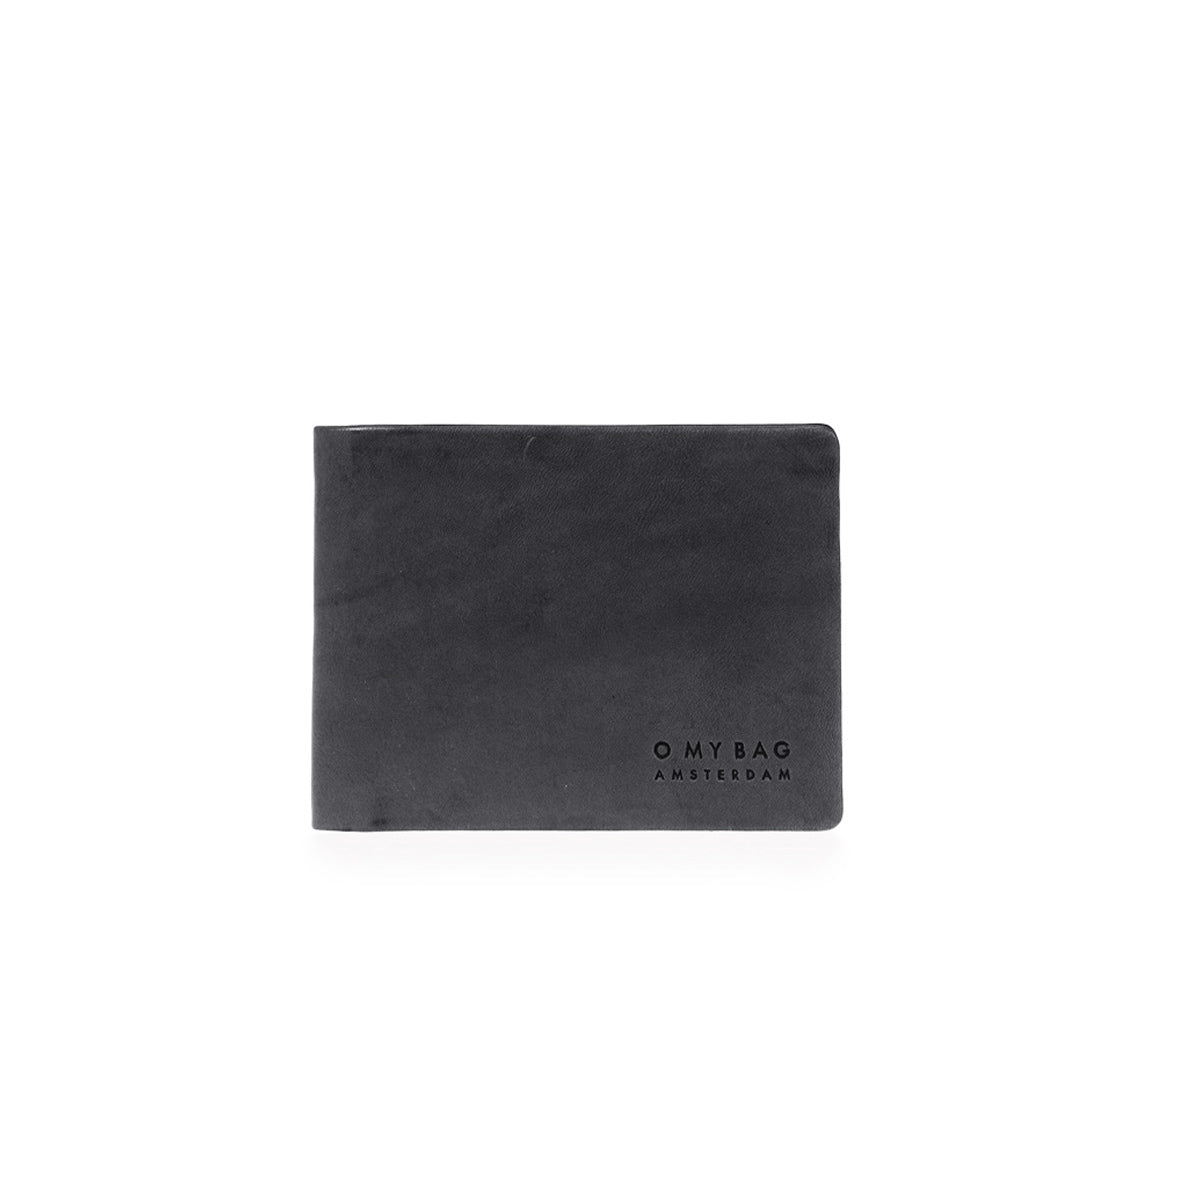 O MY BAG Joshua‘s Wallet Black Classic Leather